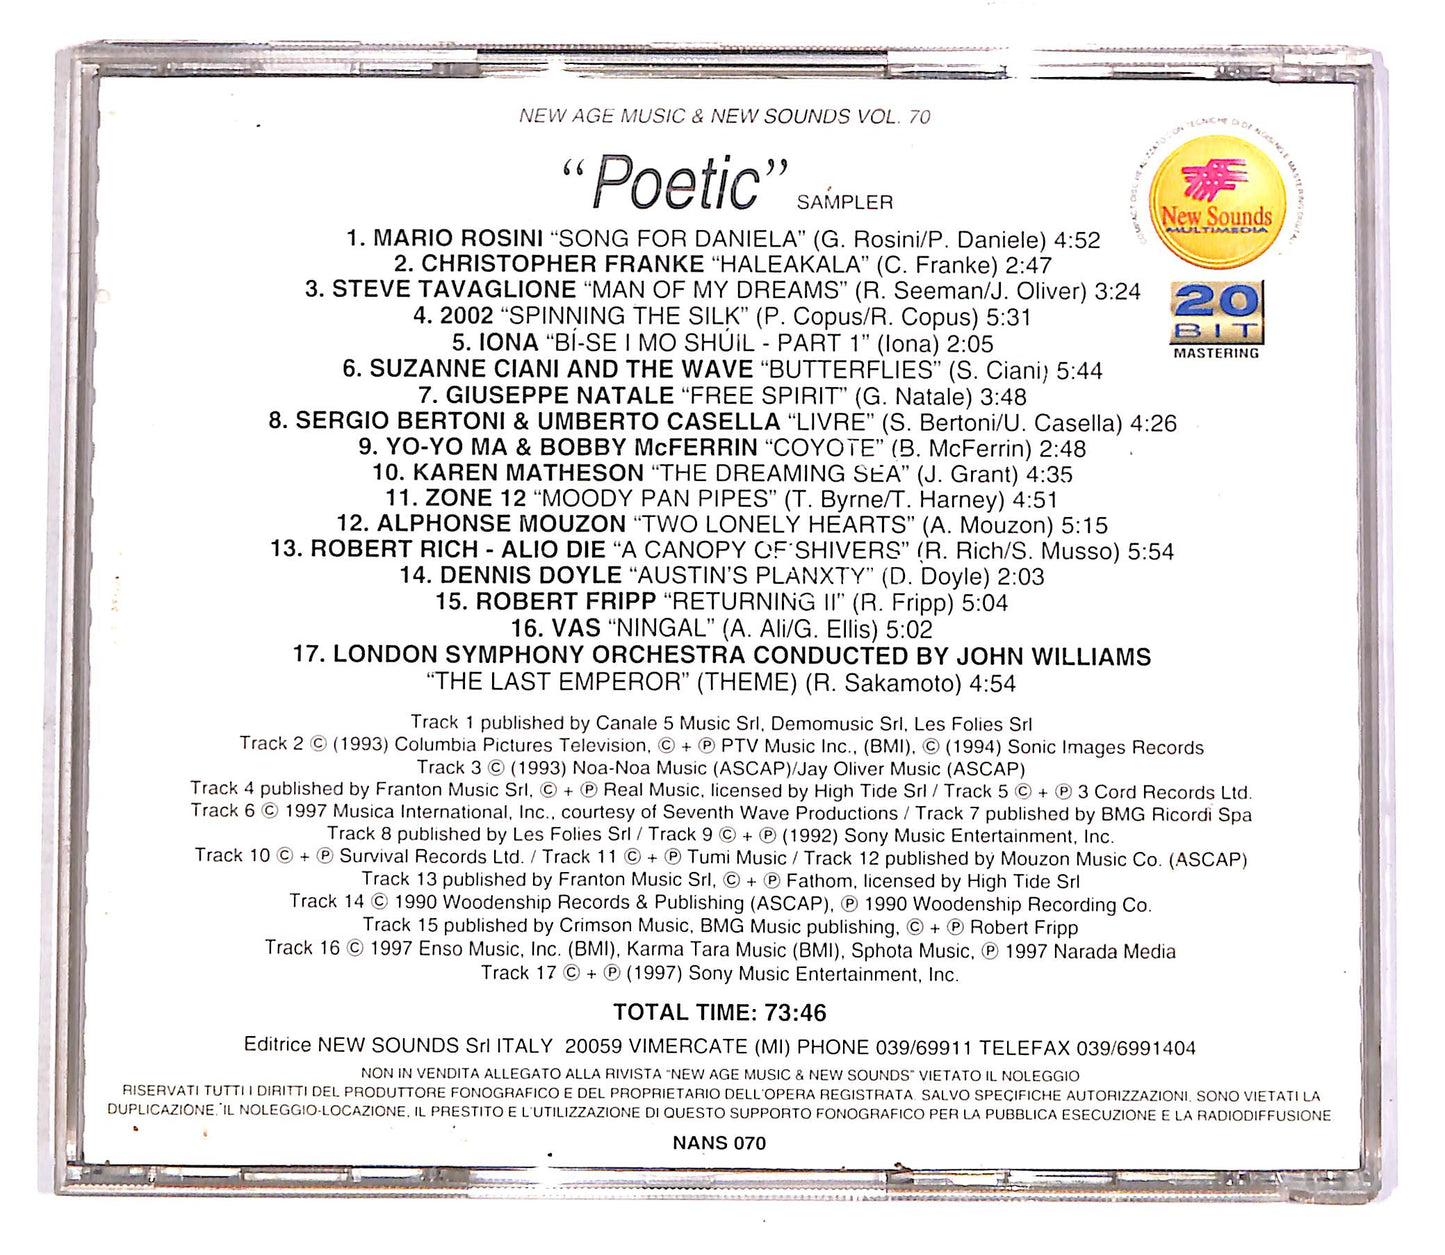 EBOND New Age Music & New Sounds Vol.70 - Poetic EDITORIALE CD CD052608